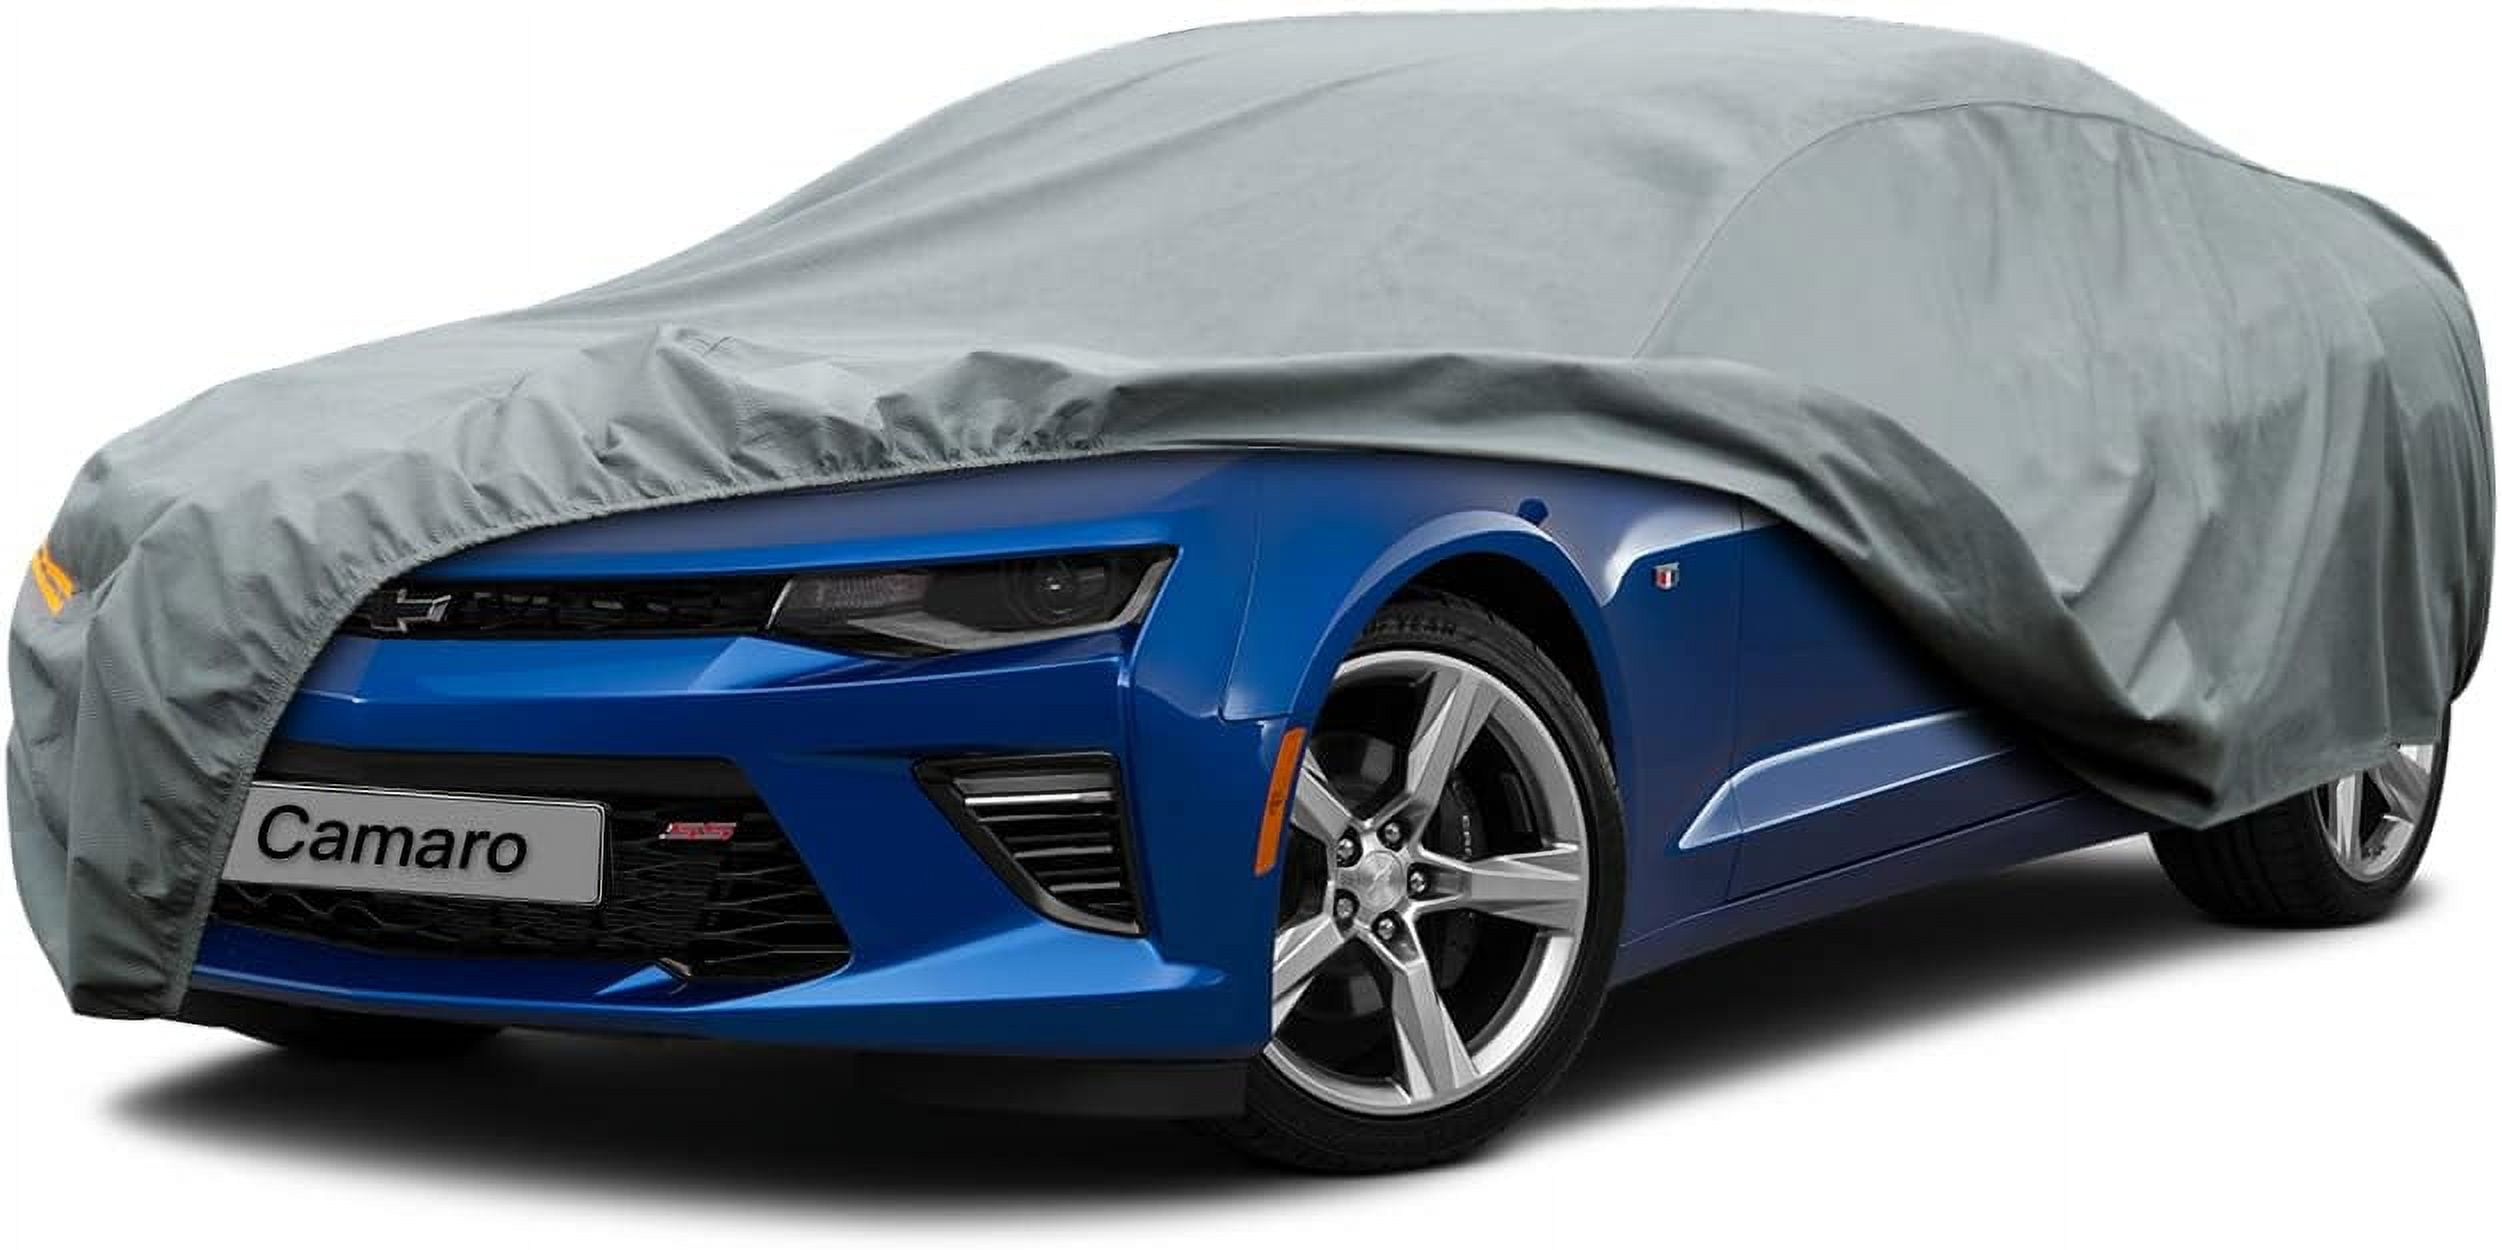 iCarCover Premium Car Cover for 2003-2008 BMW Z4 Waterproof All Weather  Rain Snow UV Sun Protector Full Exterior Indoor Outdoor Car Cover